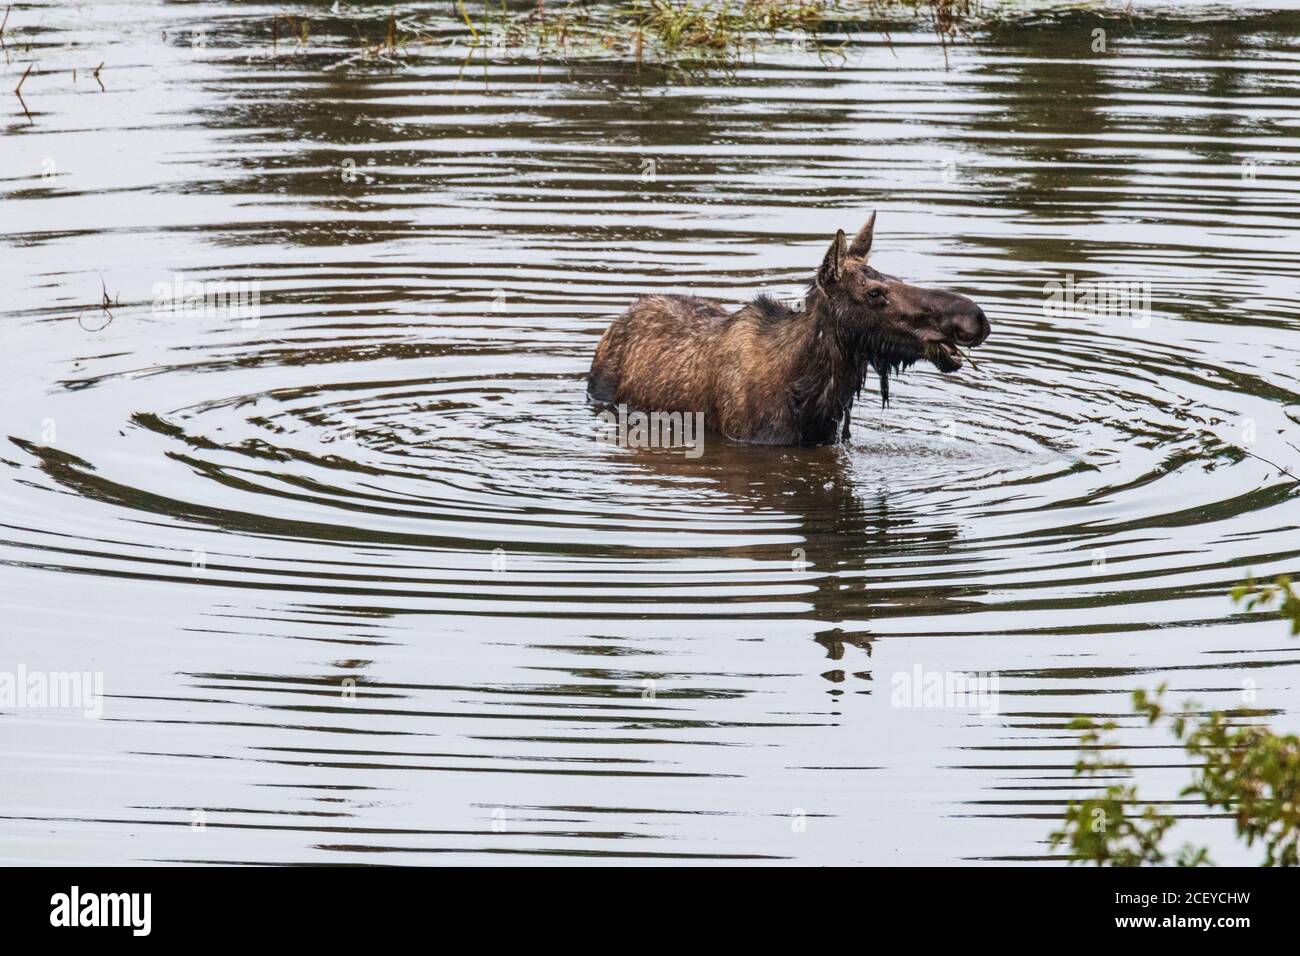 Female moose standing in water with a mouth of food looking to the right Stock Photo